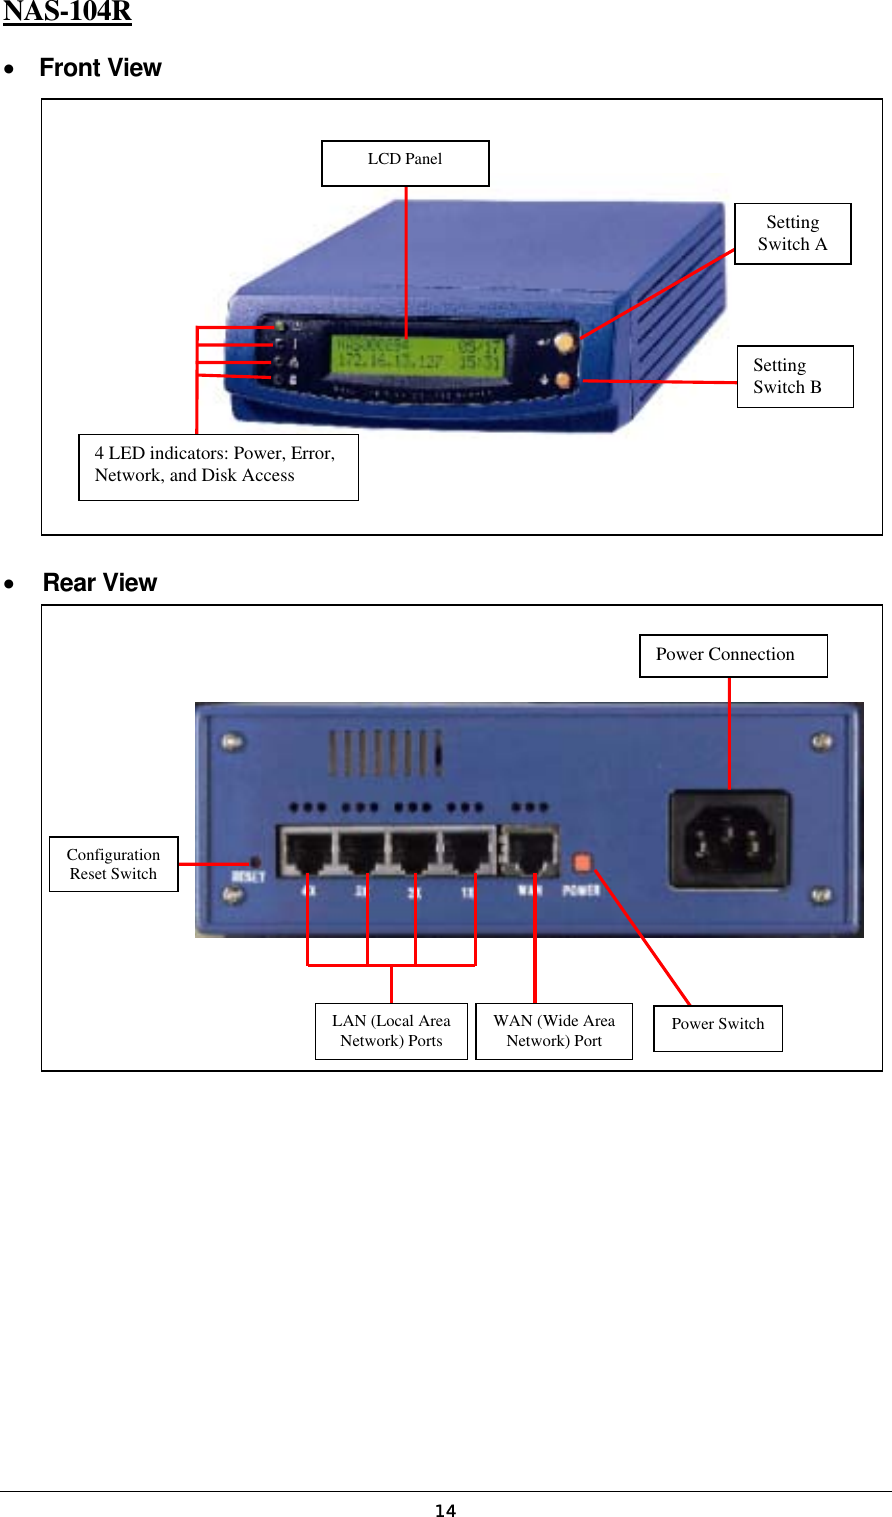   14Setting Switch A Setting Switch B LCD Panel 4 LED indicators: Power, Error, Network, and Disk Access NAS-104R •   Front View                 •  Rear View                LAN (Local Area Network) Ports WAN (Wide Area Network) PortConfiguration Reset Switch Power Switch Power Connection 